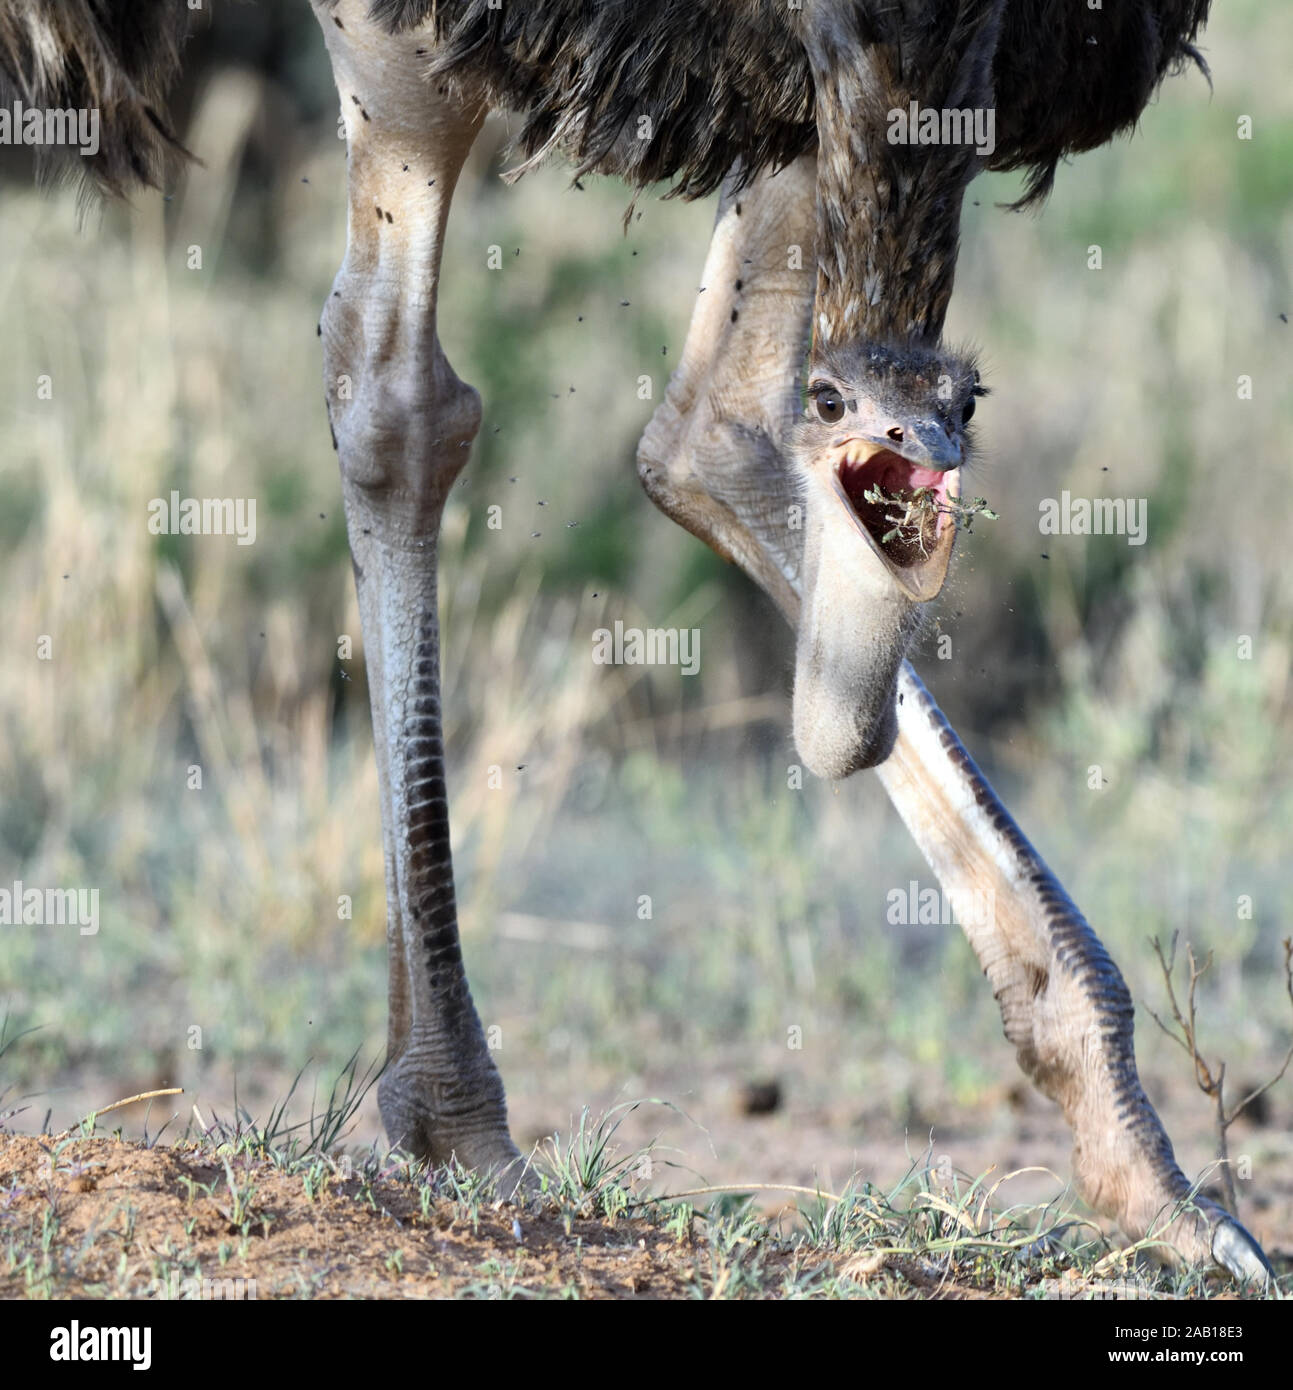 A female common ostrich (Struthio camelus) gulps down an uprooted green plant plucked from among dry grasses. . Tarangire National Park, Tanzania. Stock Photo